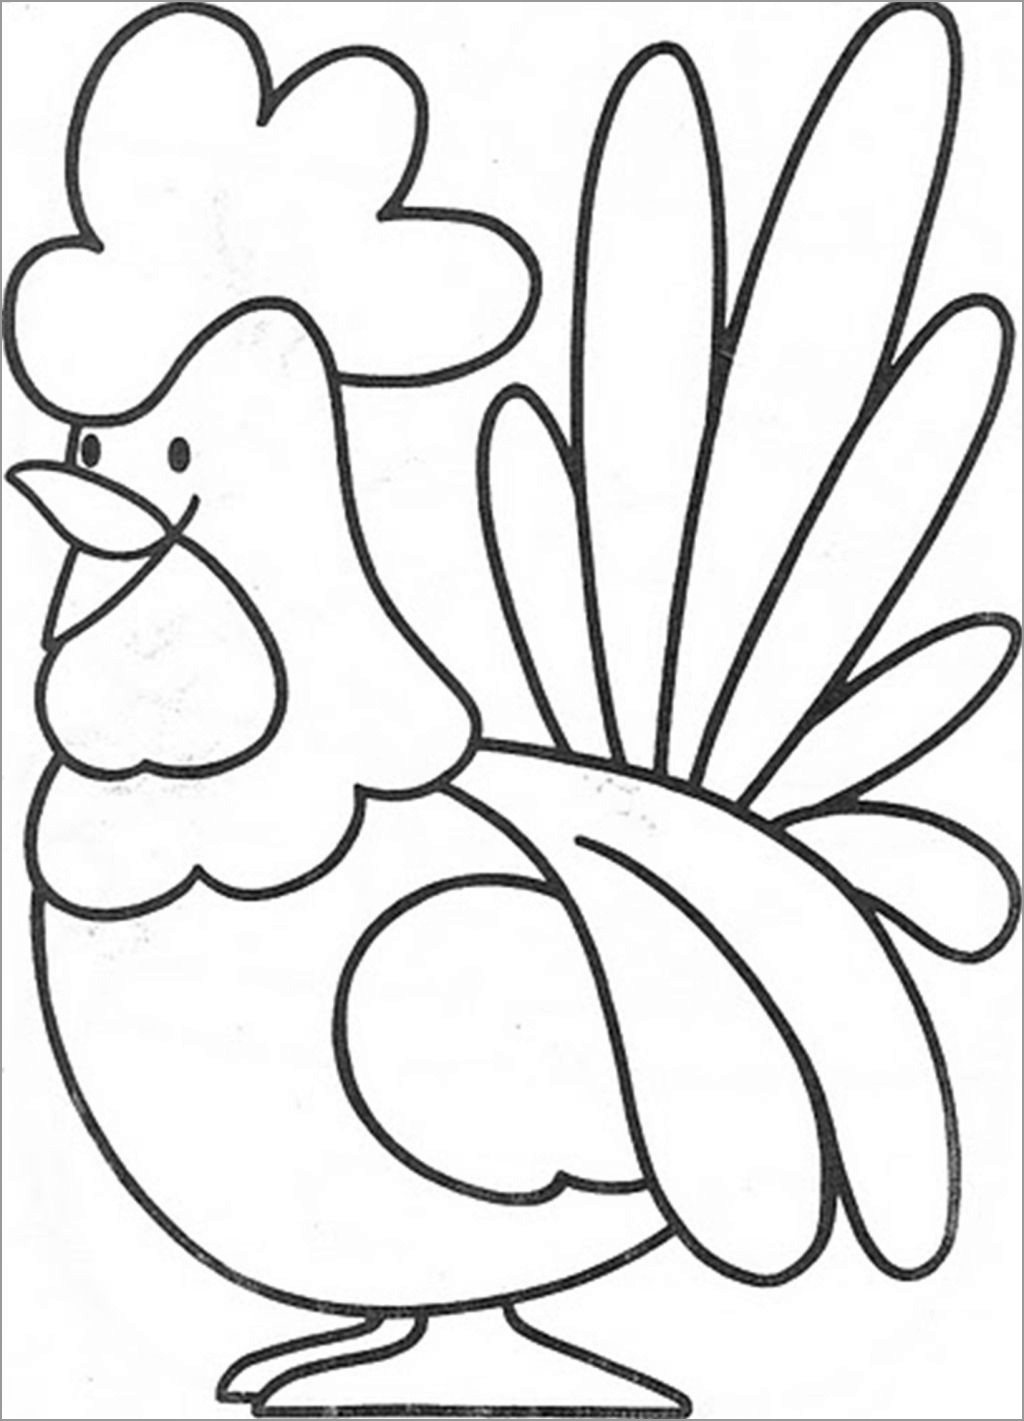 Cartoon Rooster Coloring Page